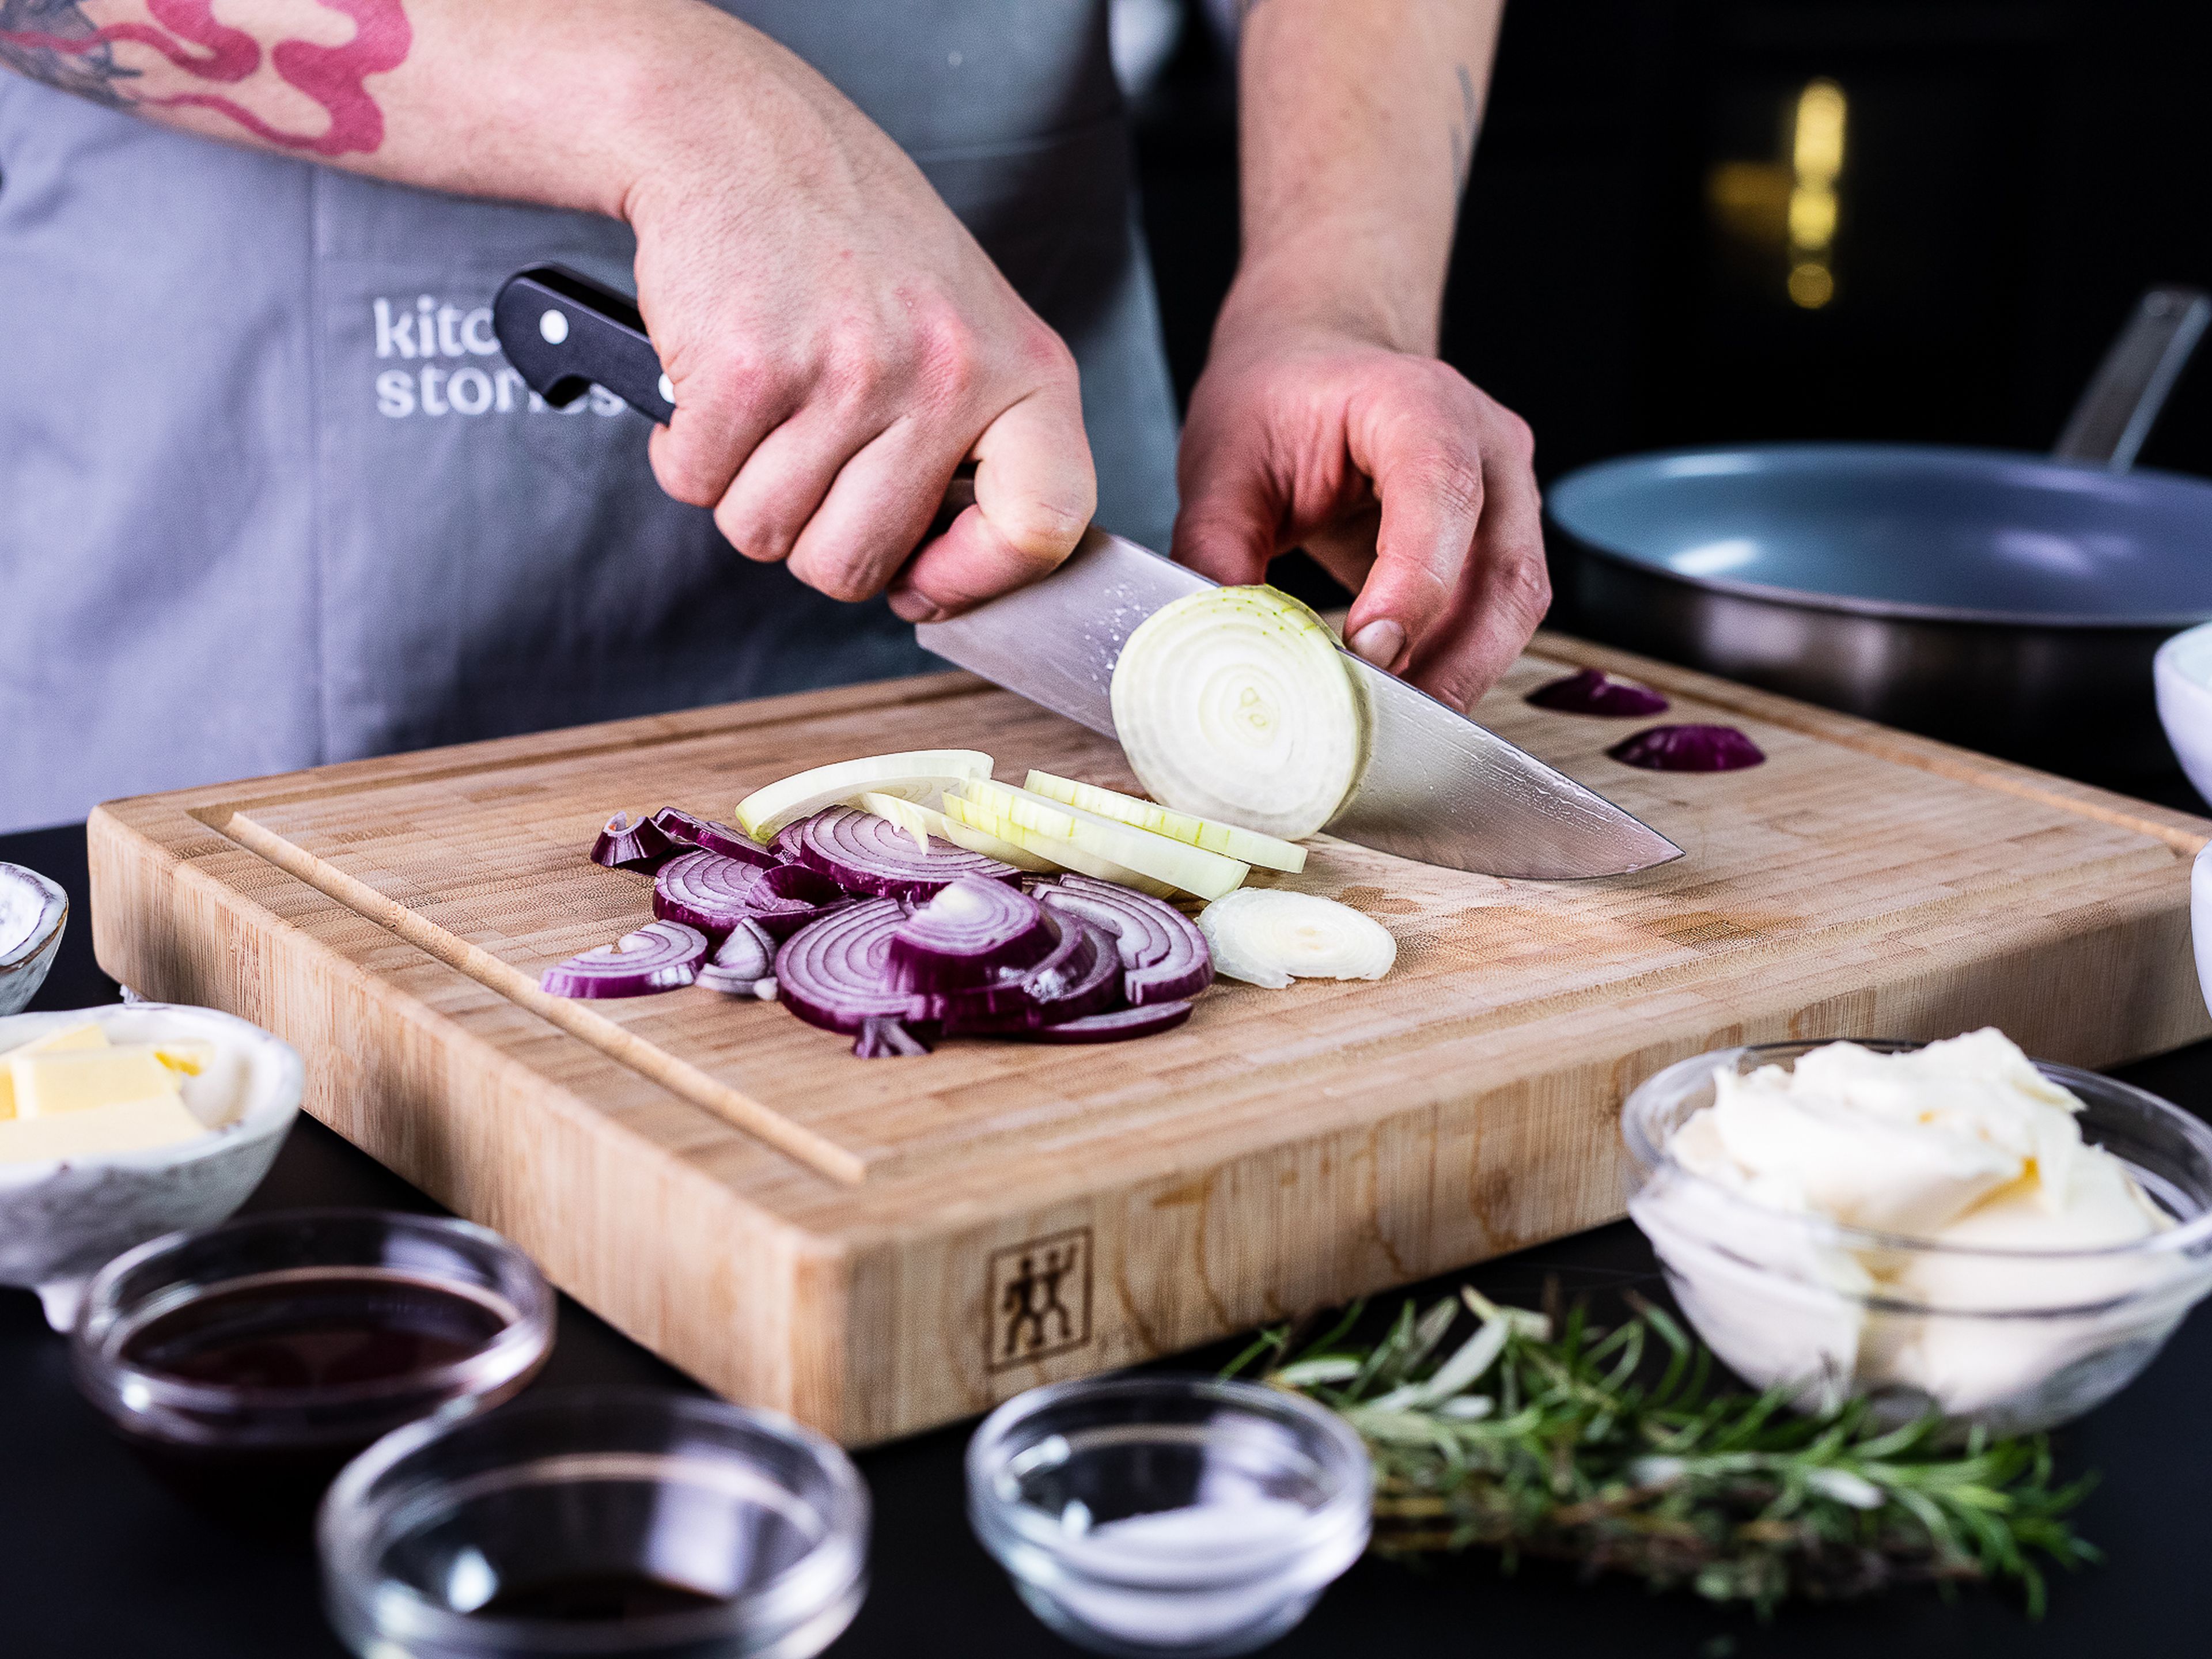 Peel and trim onions. Slice some of the onions in thin slices, and transfer to a bowl. Slice other onions into thicker rings. Pluck leaves from sprigs of rosemary and thyme, then roughly chop.